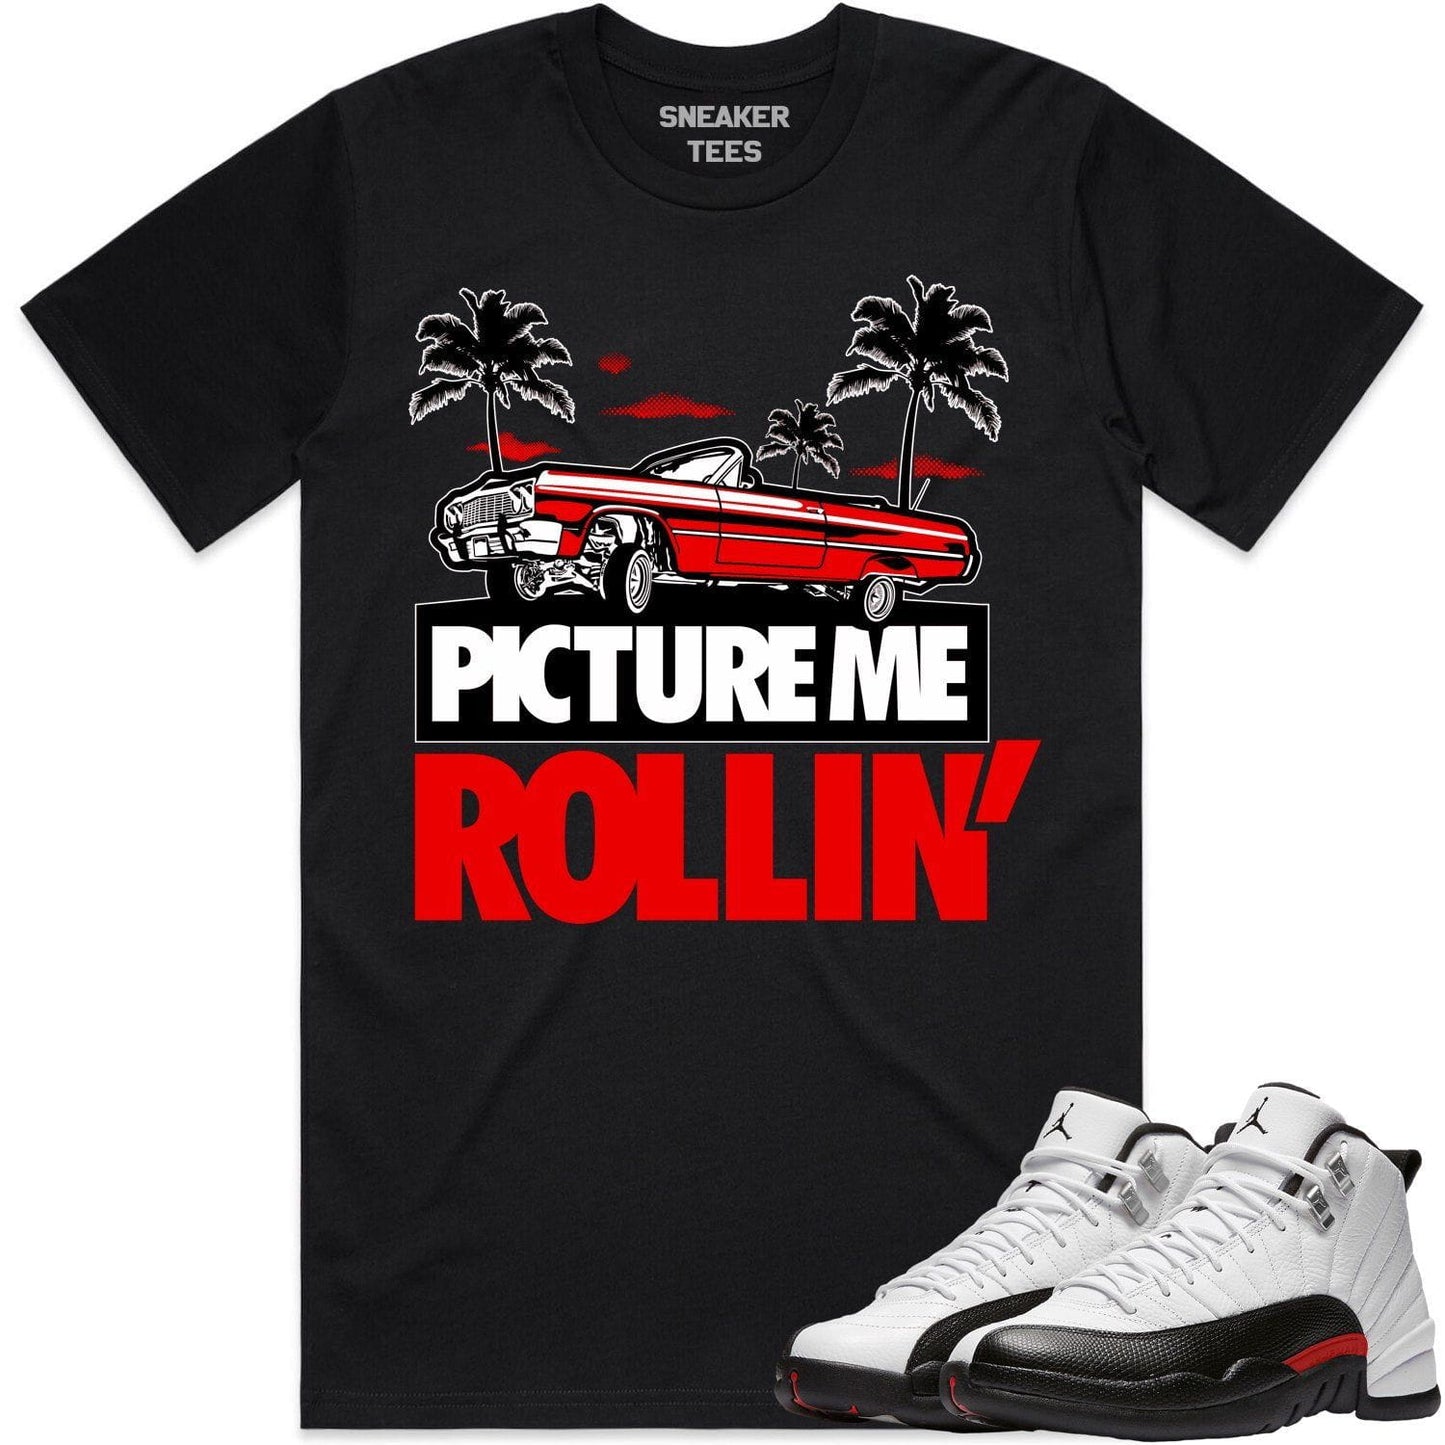 Red Taxi 12s Shirt - Jordan Retro 12 Red Taxi Shirts - Picture Rollin